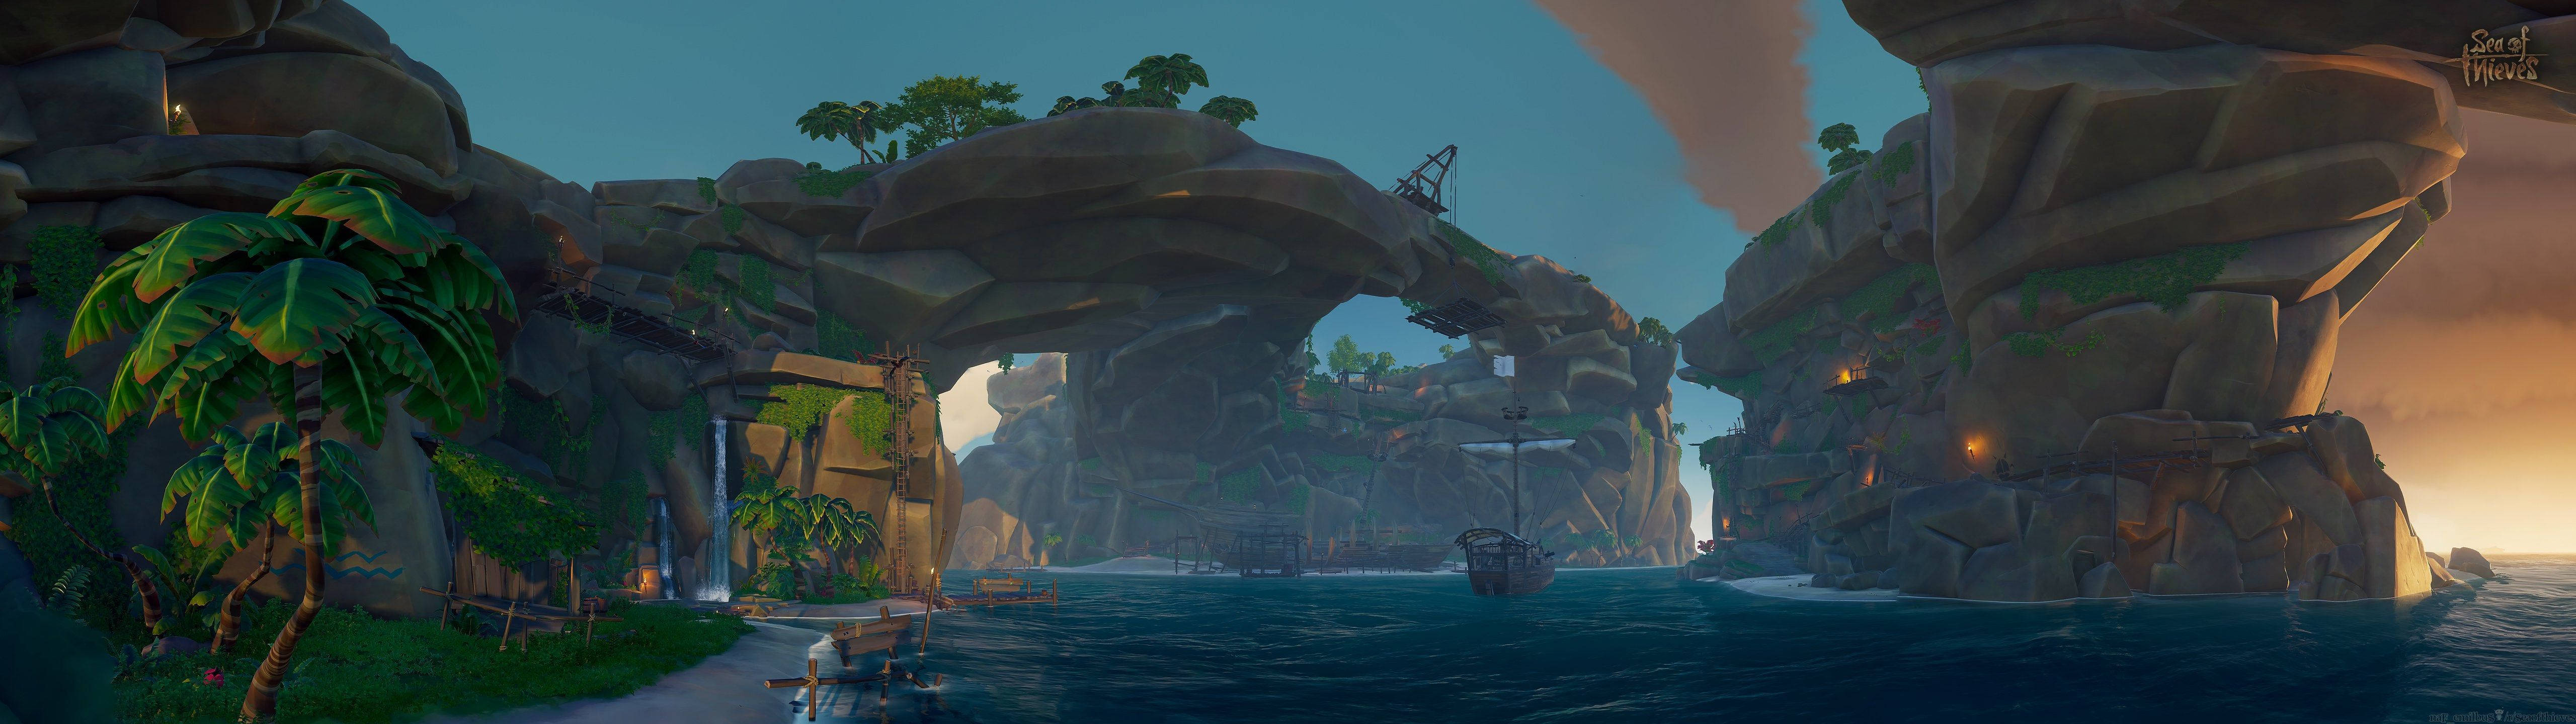 5120x1440 Game Sea Of Thieves Rock Formations